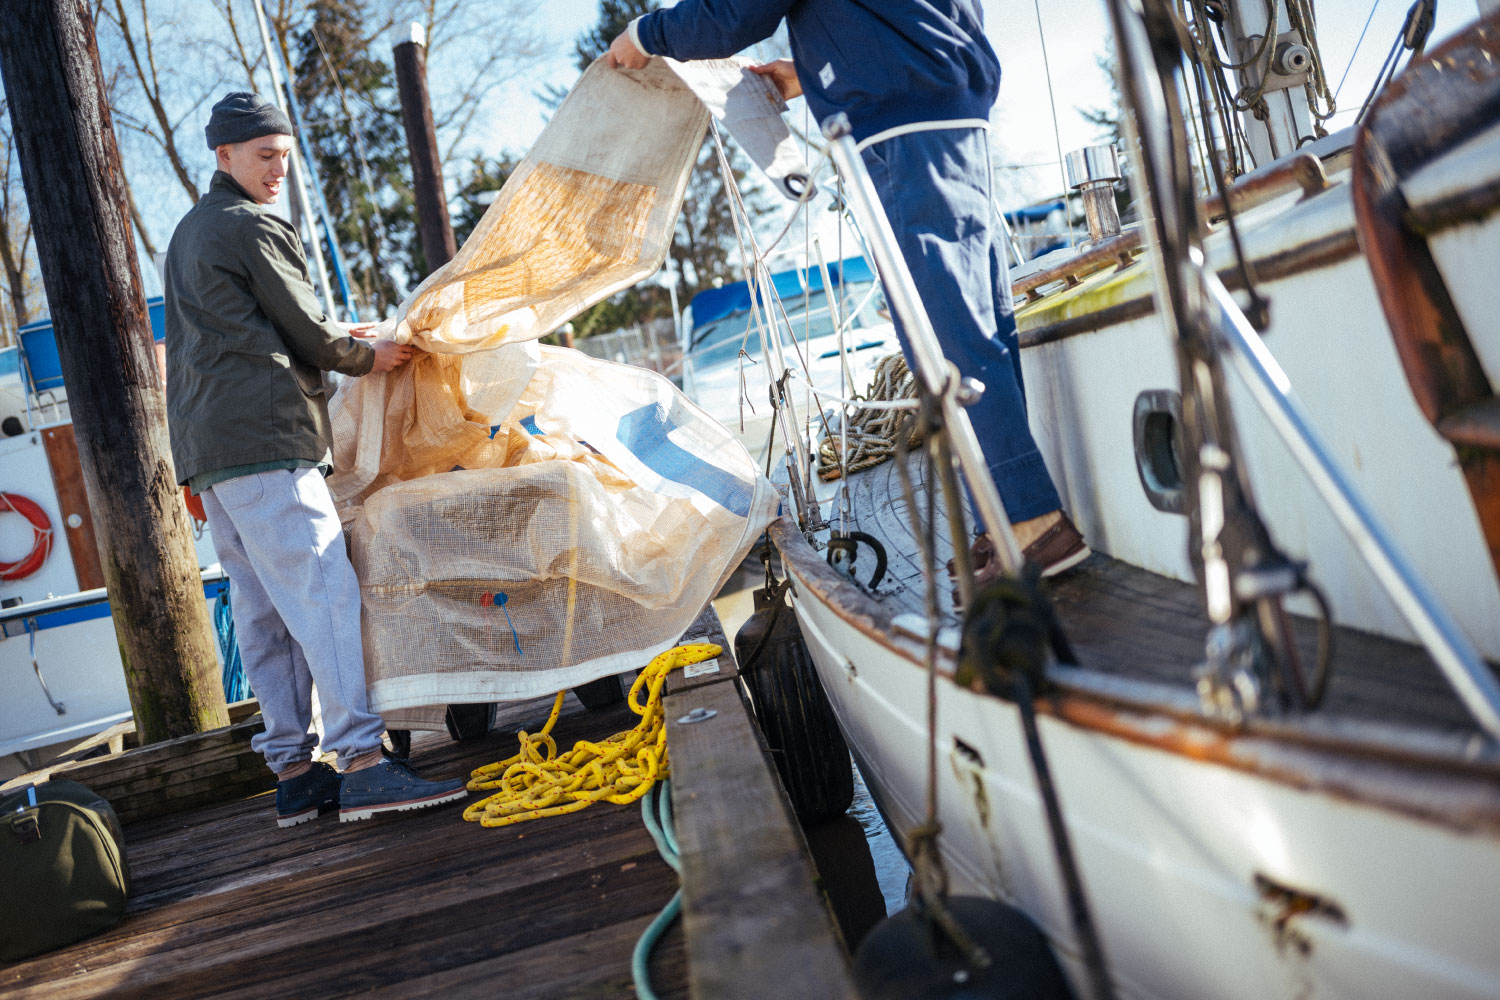 A person taking a tarp off of a sailboat wearing the Herschel Supply Company x Sperry Authentic Original Lug Chukka shoes in Peacoat/Navy/Blanc de Blanc